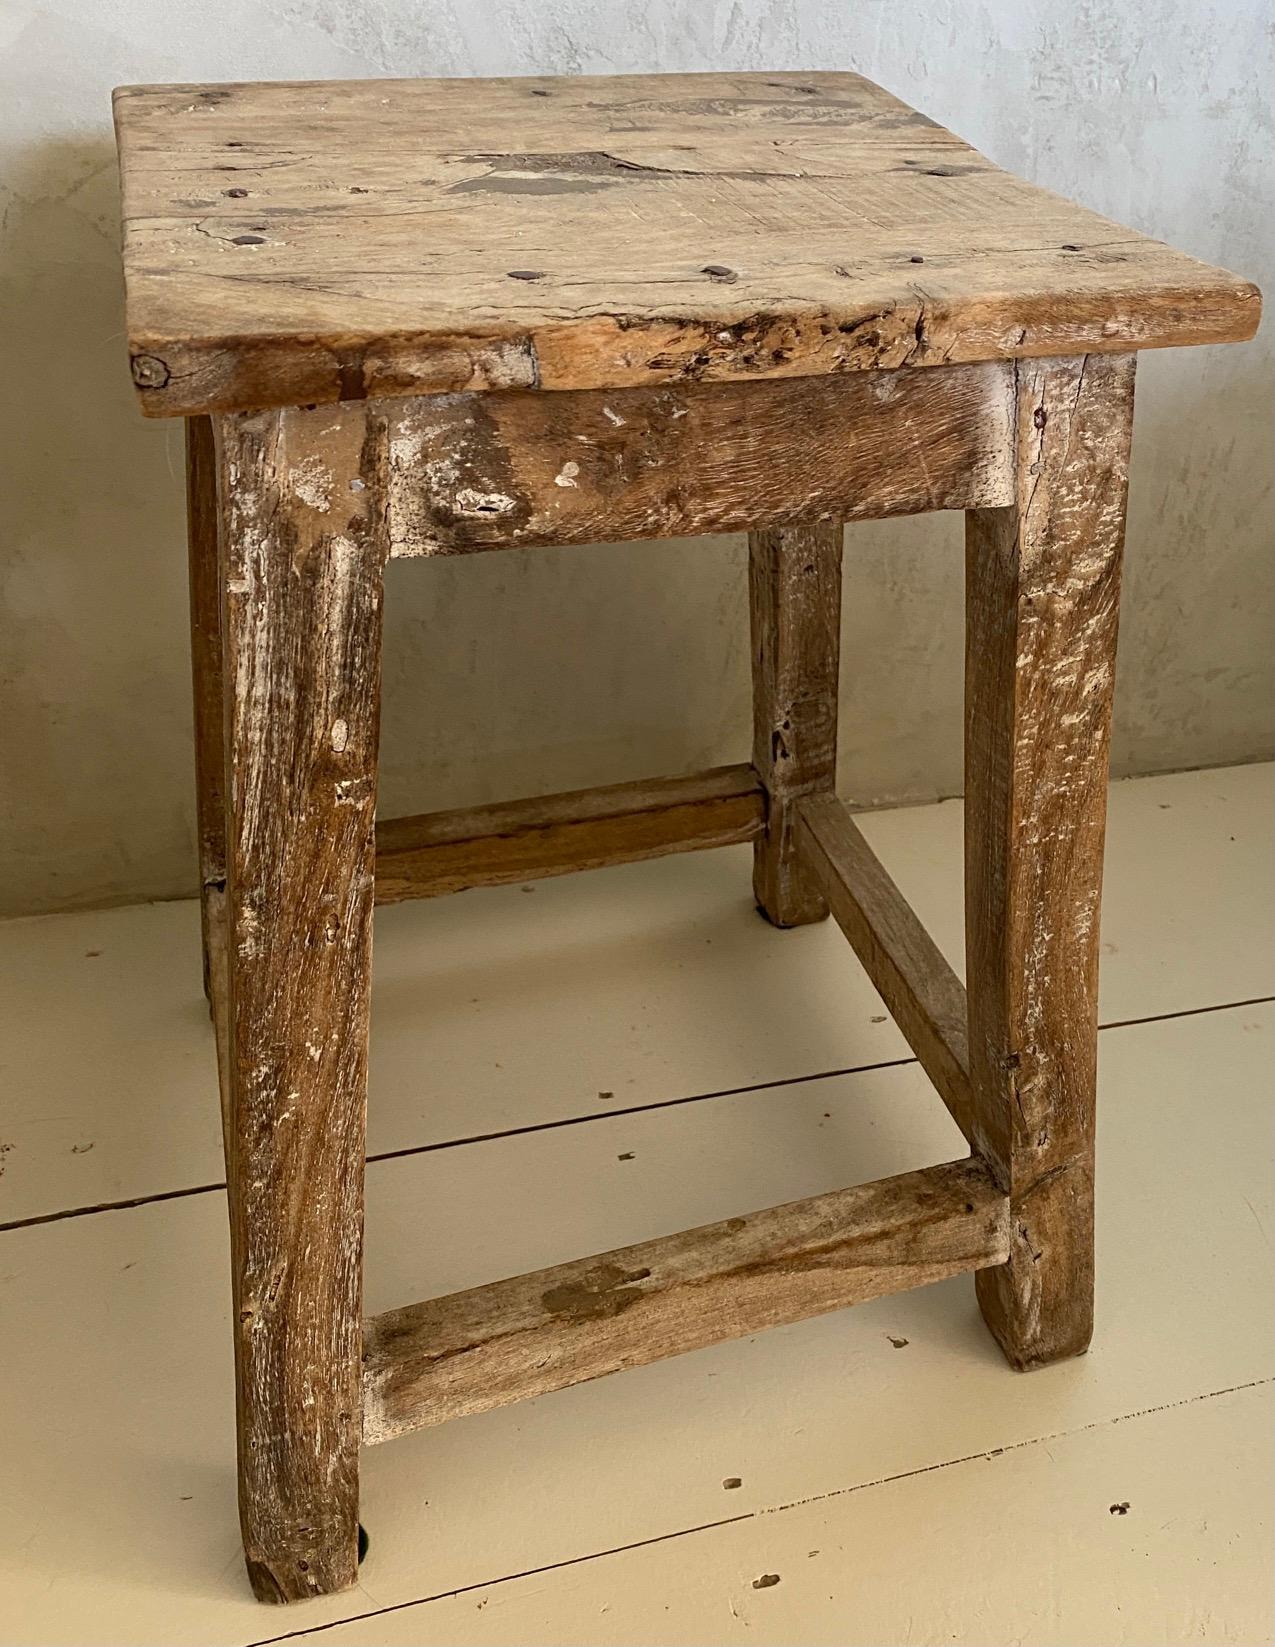 The antique Asian stool has a square top and a balanced form with timeless rustic appeal. Beautifully worn from a century of use, the aged wood patina adds rich texture to the home. It can be used for side table, end table, or extra seating. Great